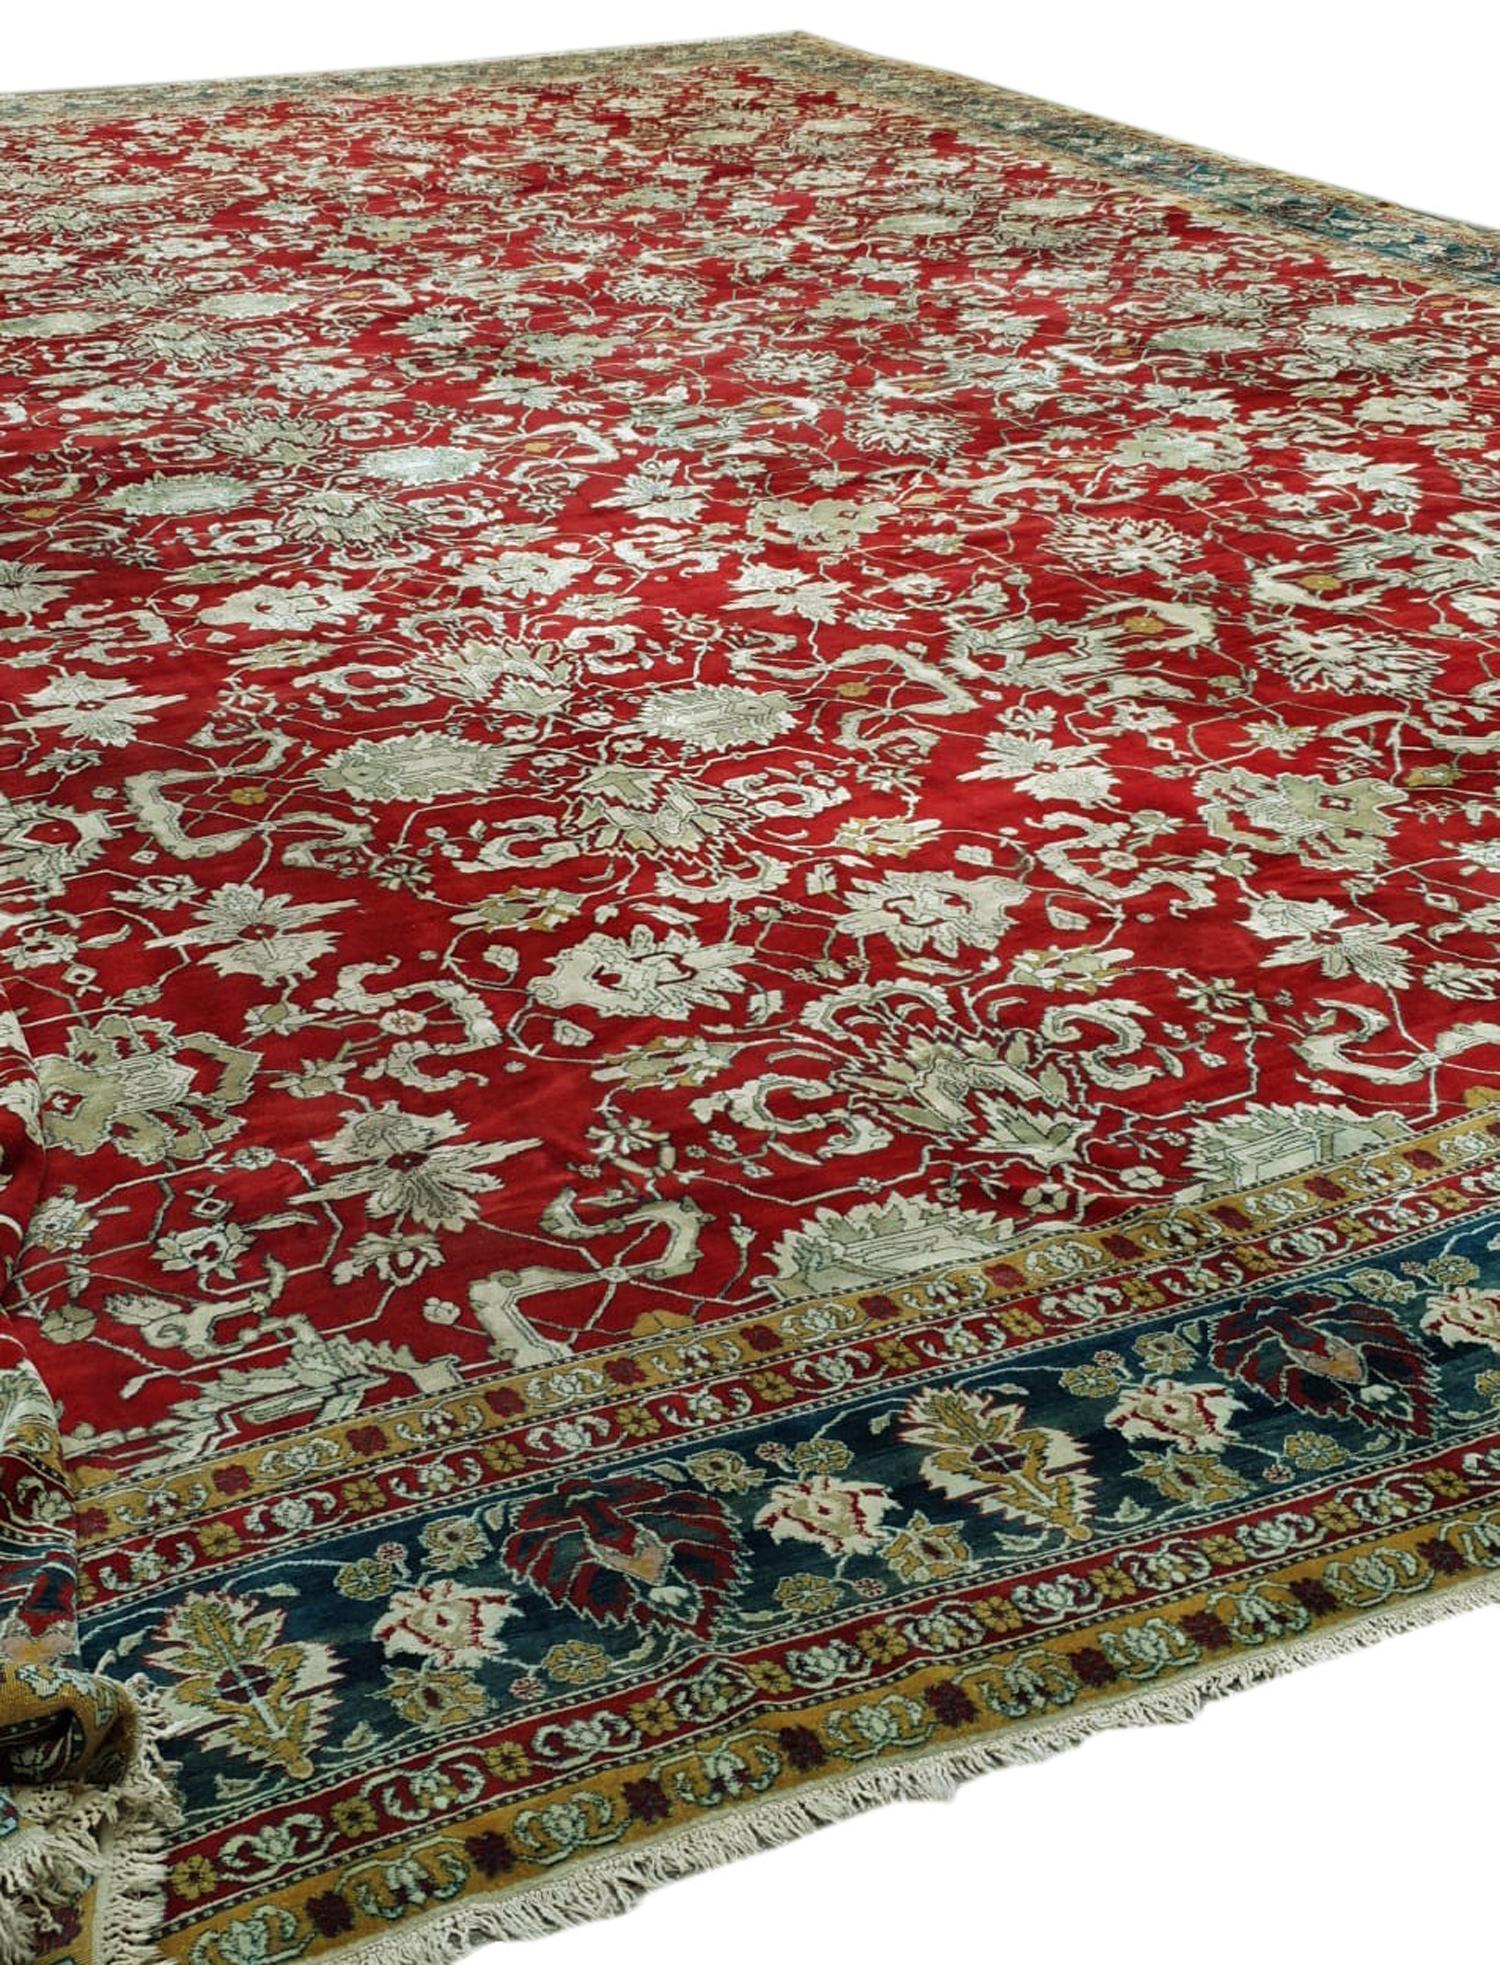 Oversized Indian Red & Green Wool Agra Palace Carpet, 19th Century For Sale 2